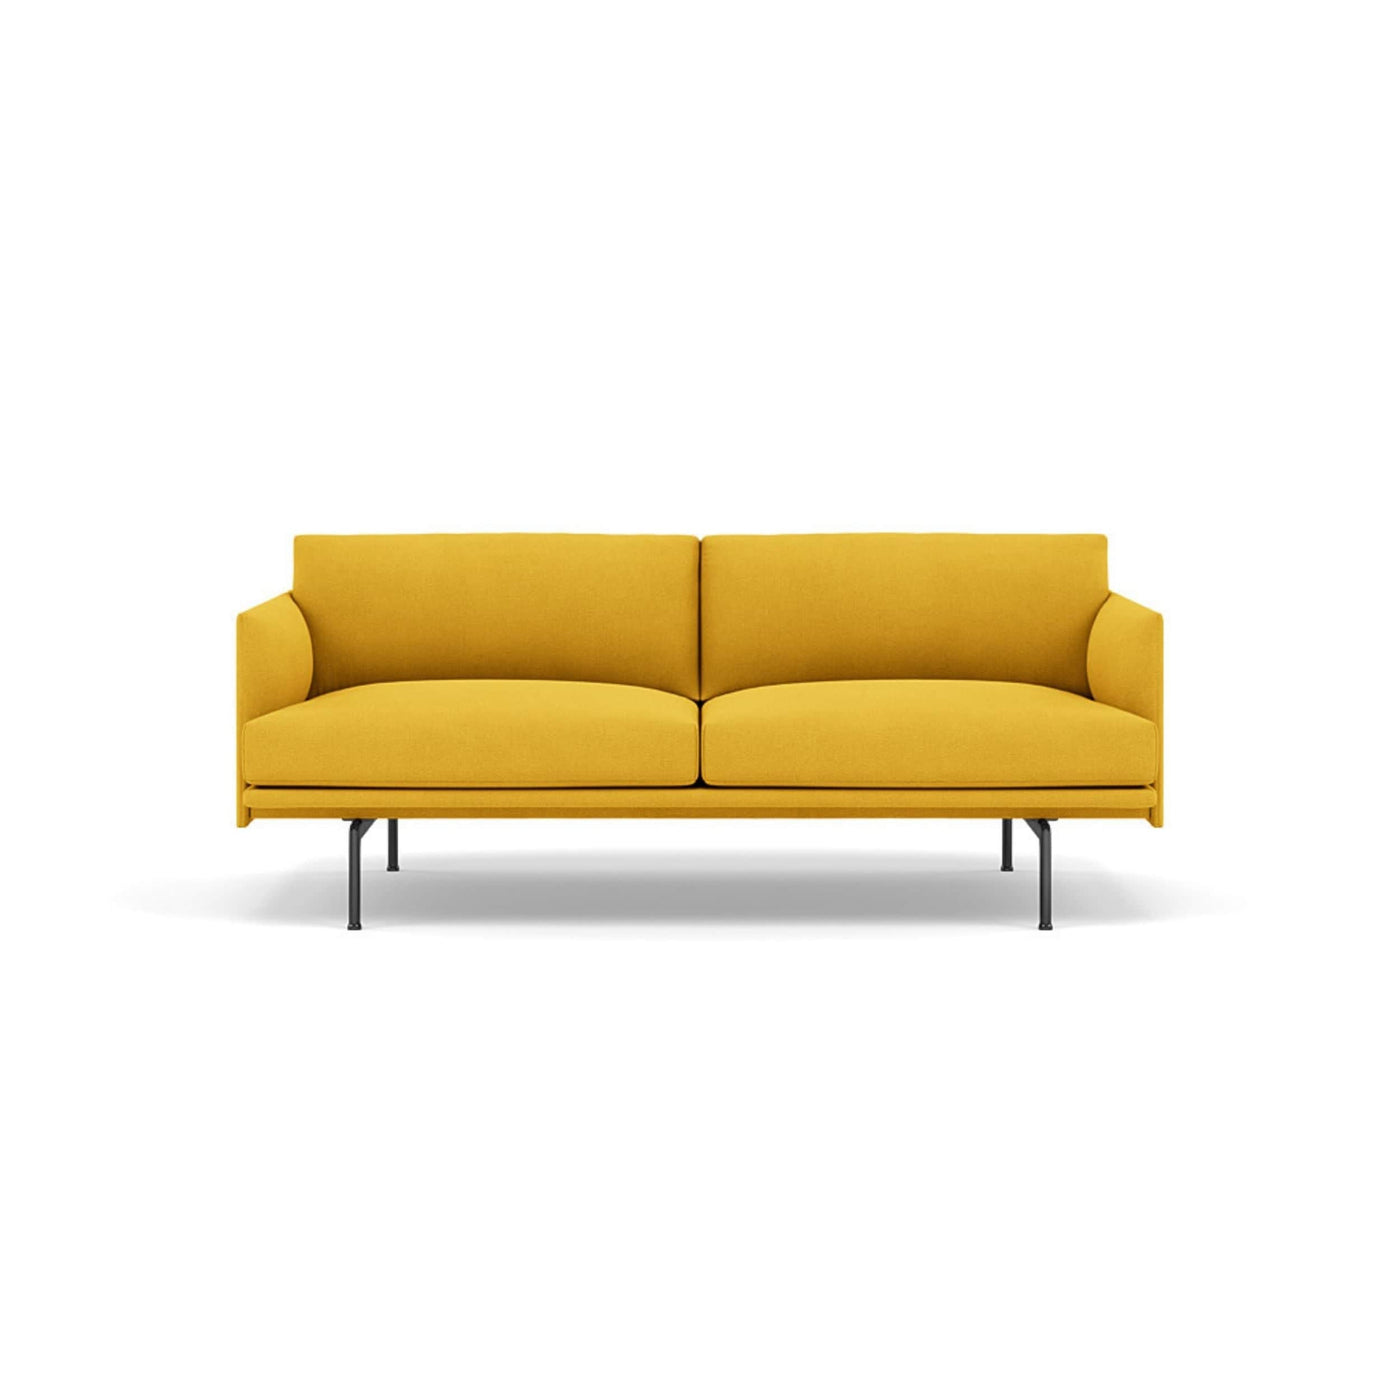 Muuto Outline 2 seater sofa in hallingdal 457 yellow fabric and black legs. Made to order from someday designs. #colour_hallingdal-457